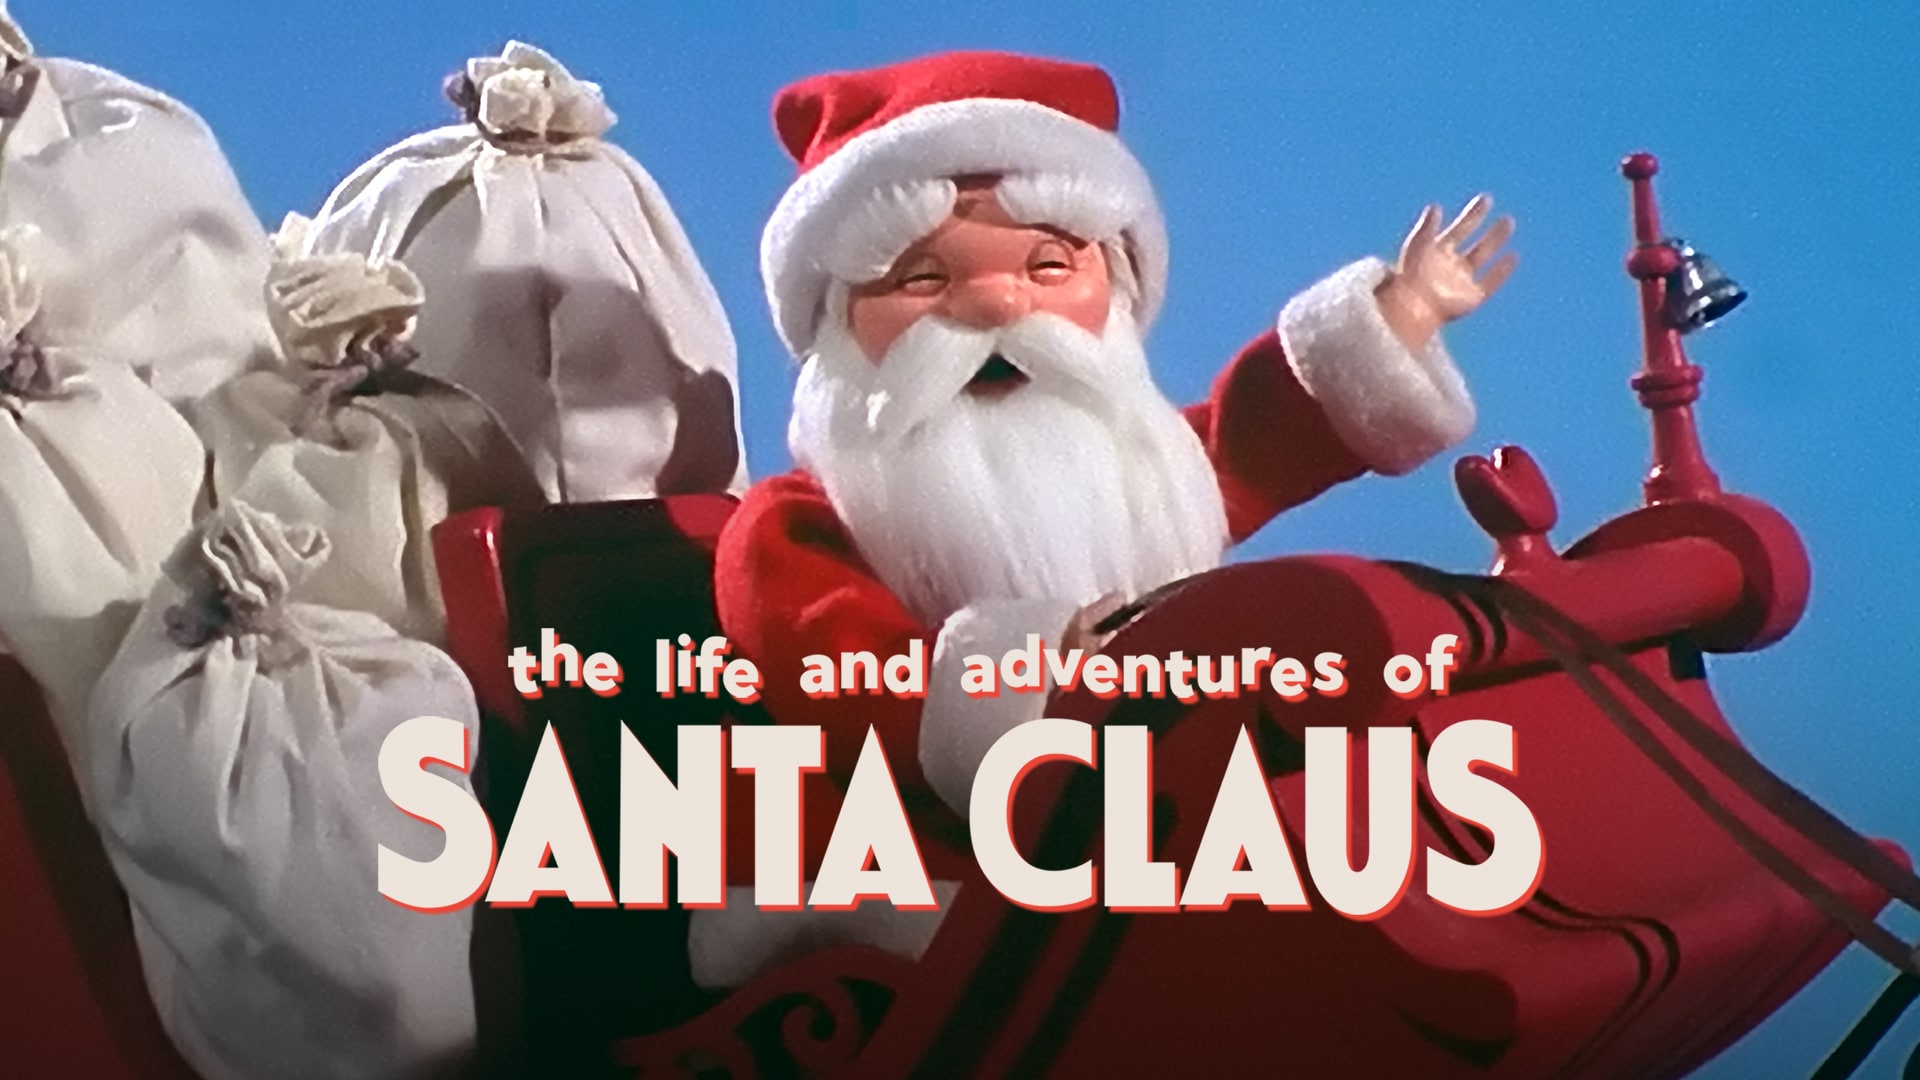 Watch The Life & Adventures of Santa Claus Online | Stream Full Movies